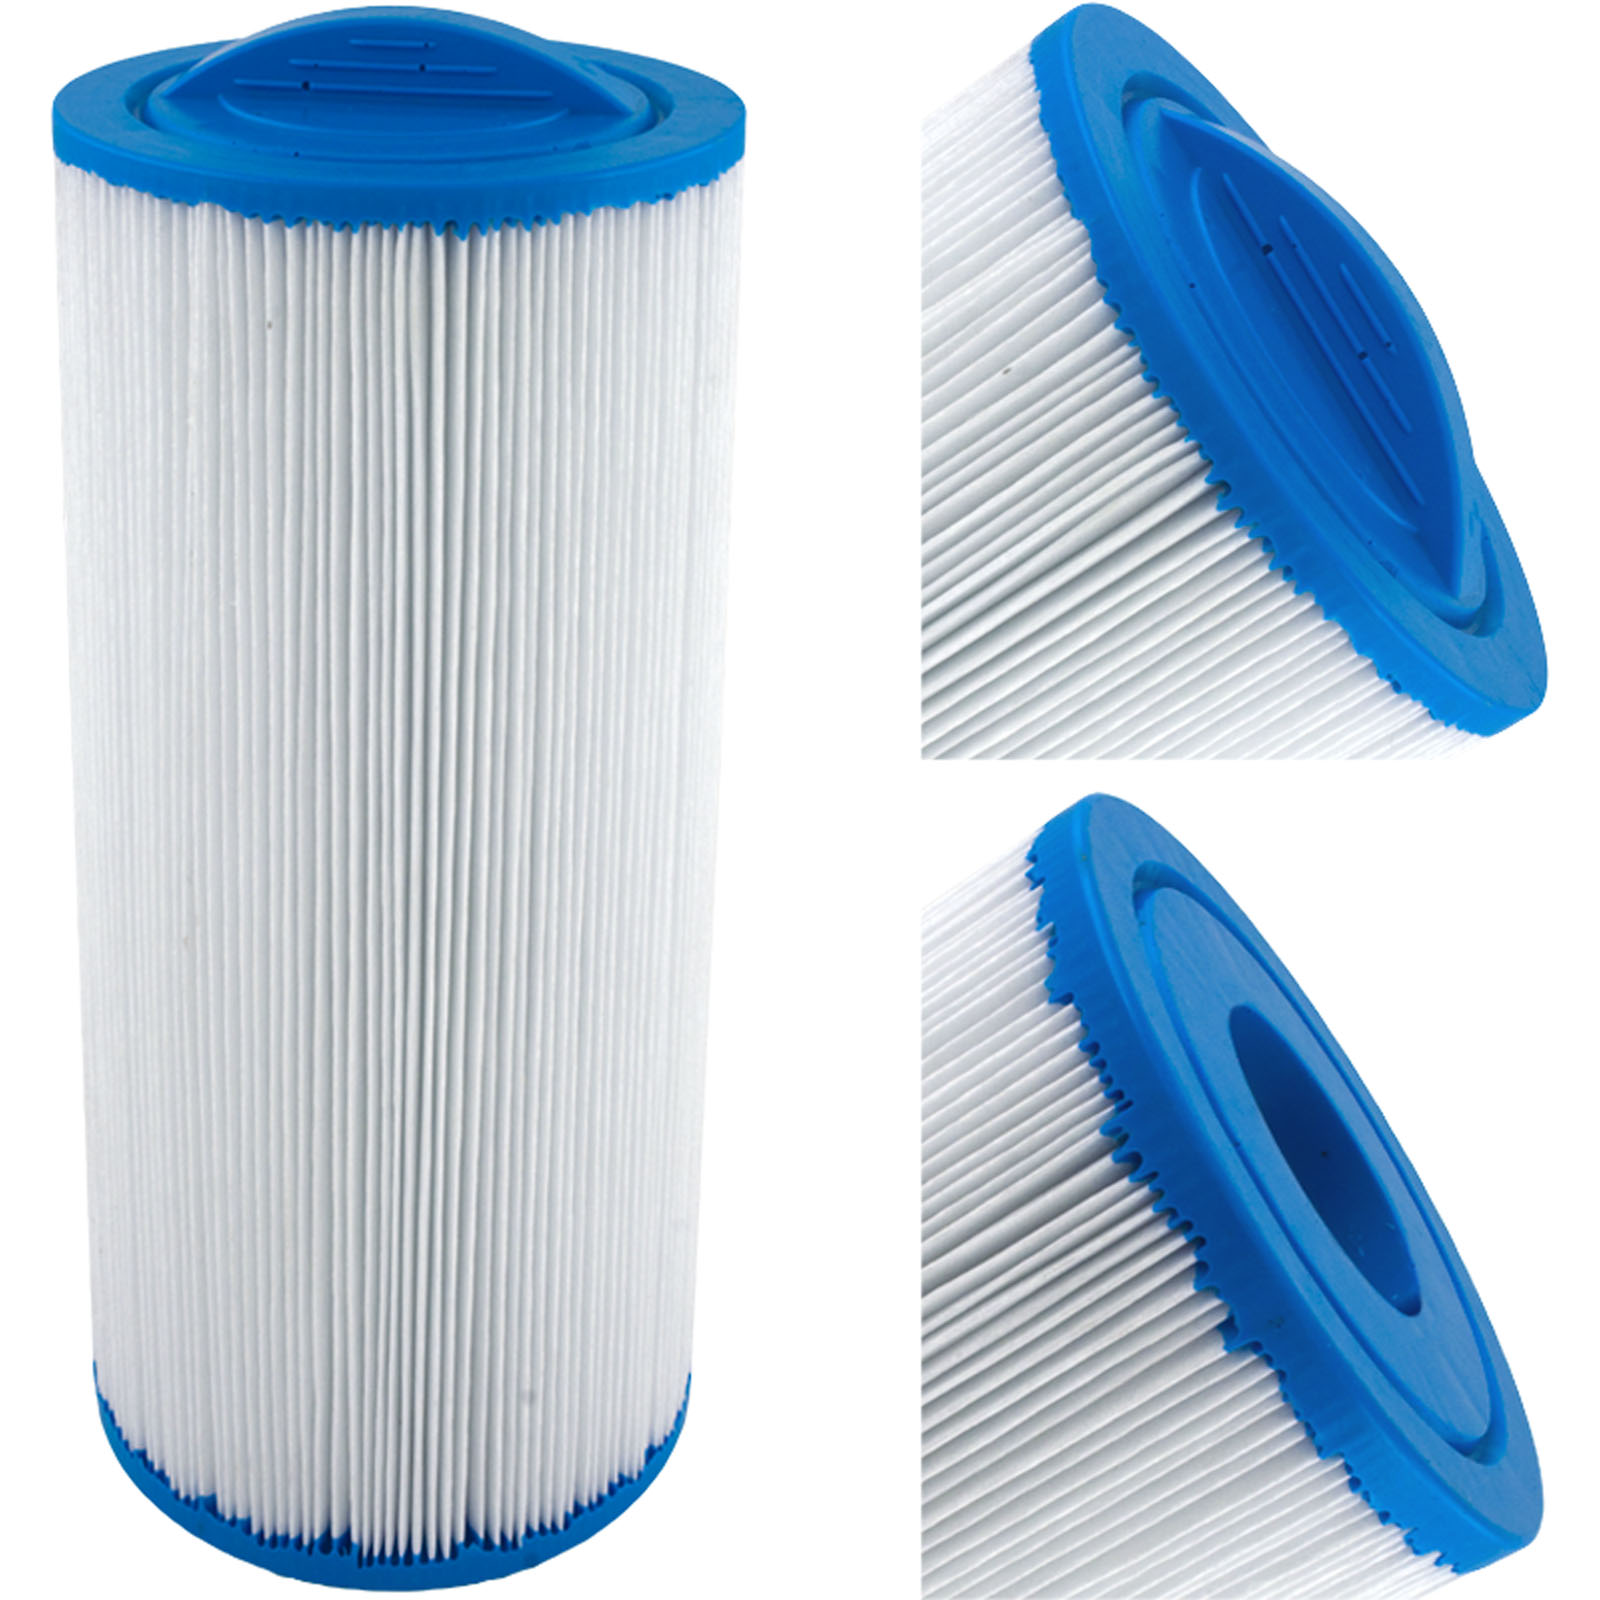 Gatsby Spa25sqft Replacement Filter Cartridge PGS25, C-4324, FC-0187